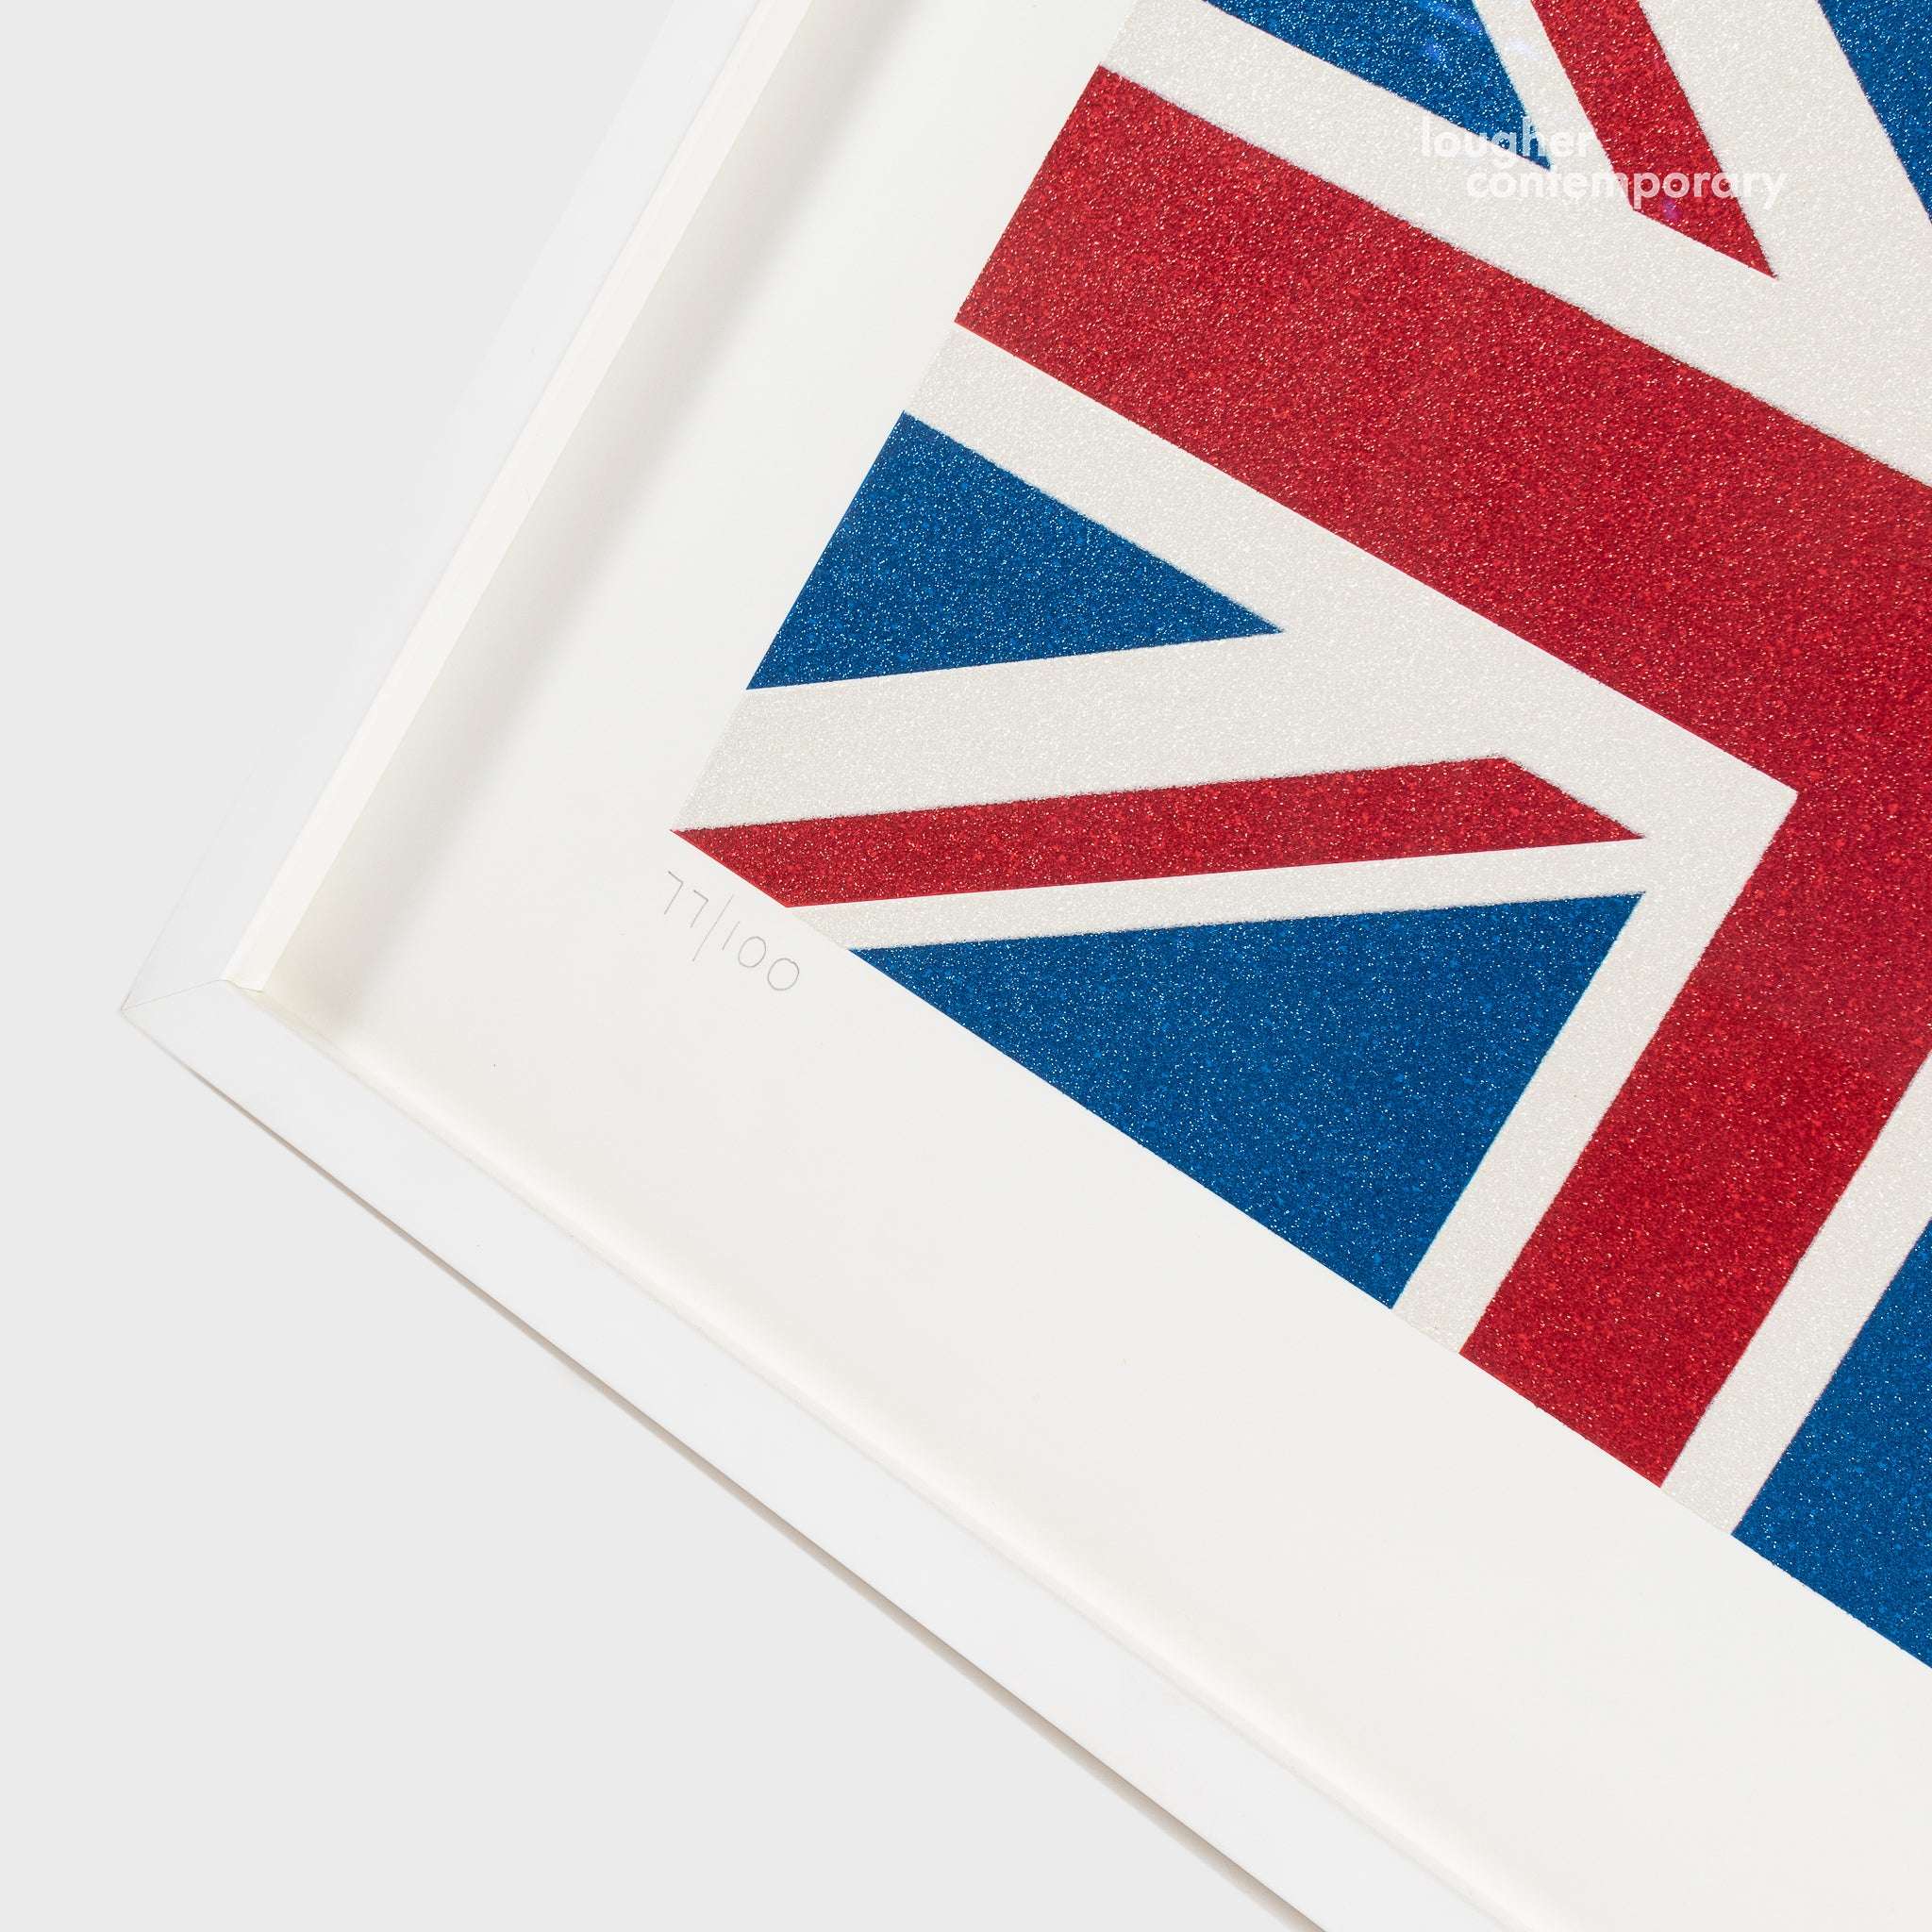 Peter Blake, Small Union Flag, 2016 For Sale - Lougher Contemporary